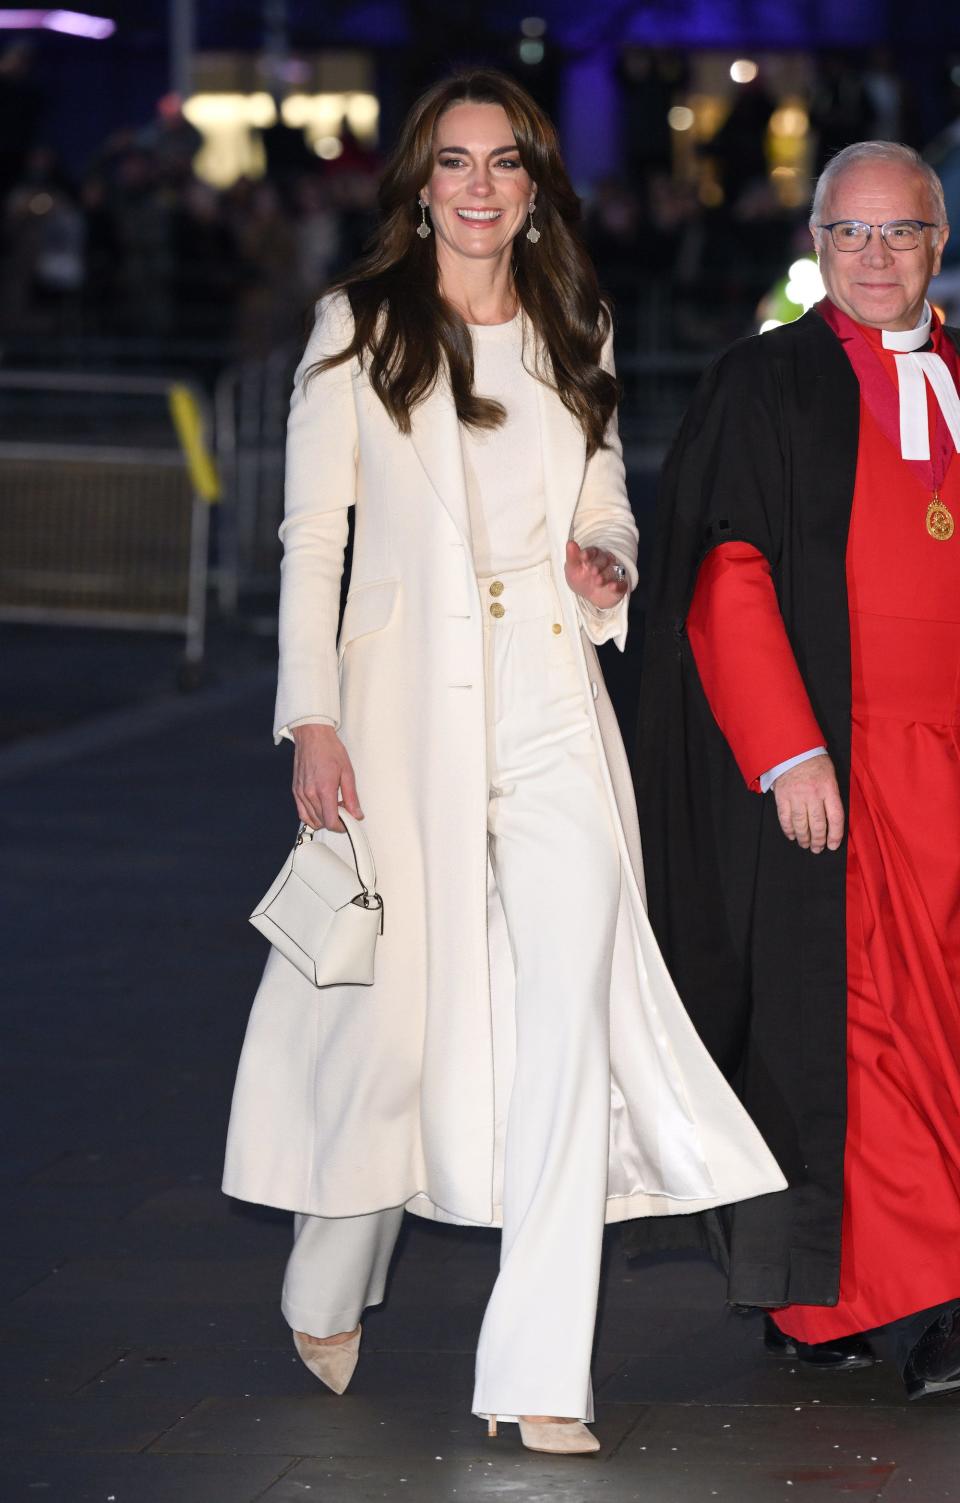 Kate Middleton walks in a white top, white jeans, and a white jacket.